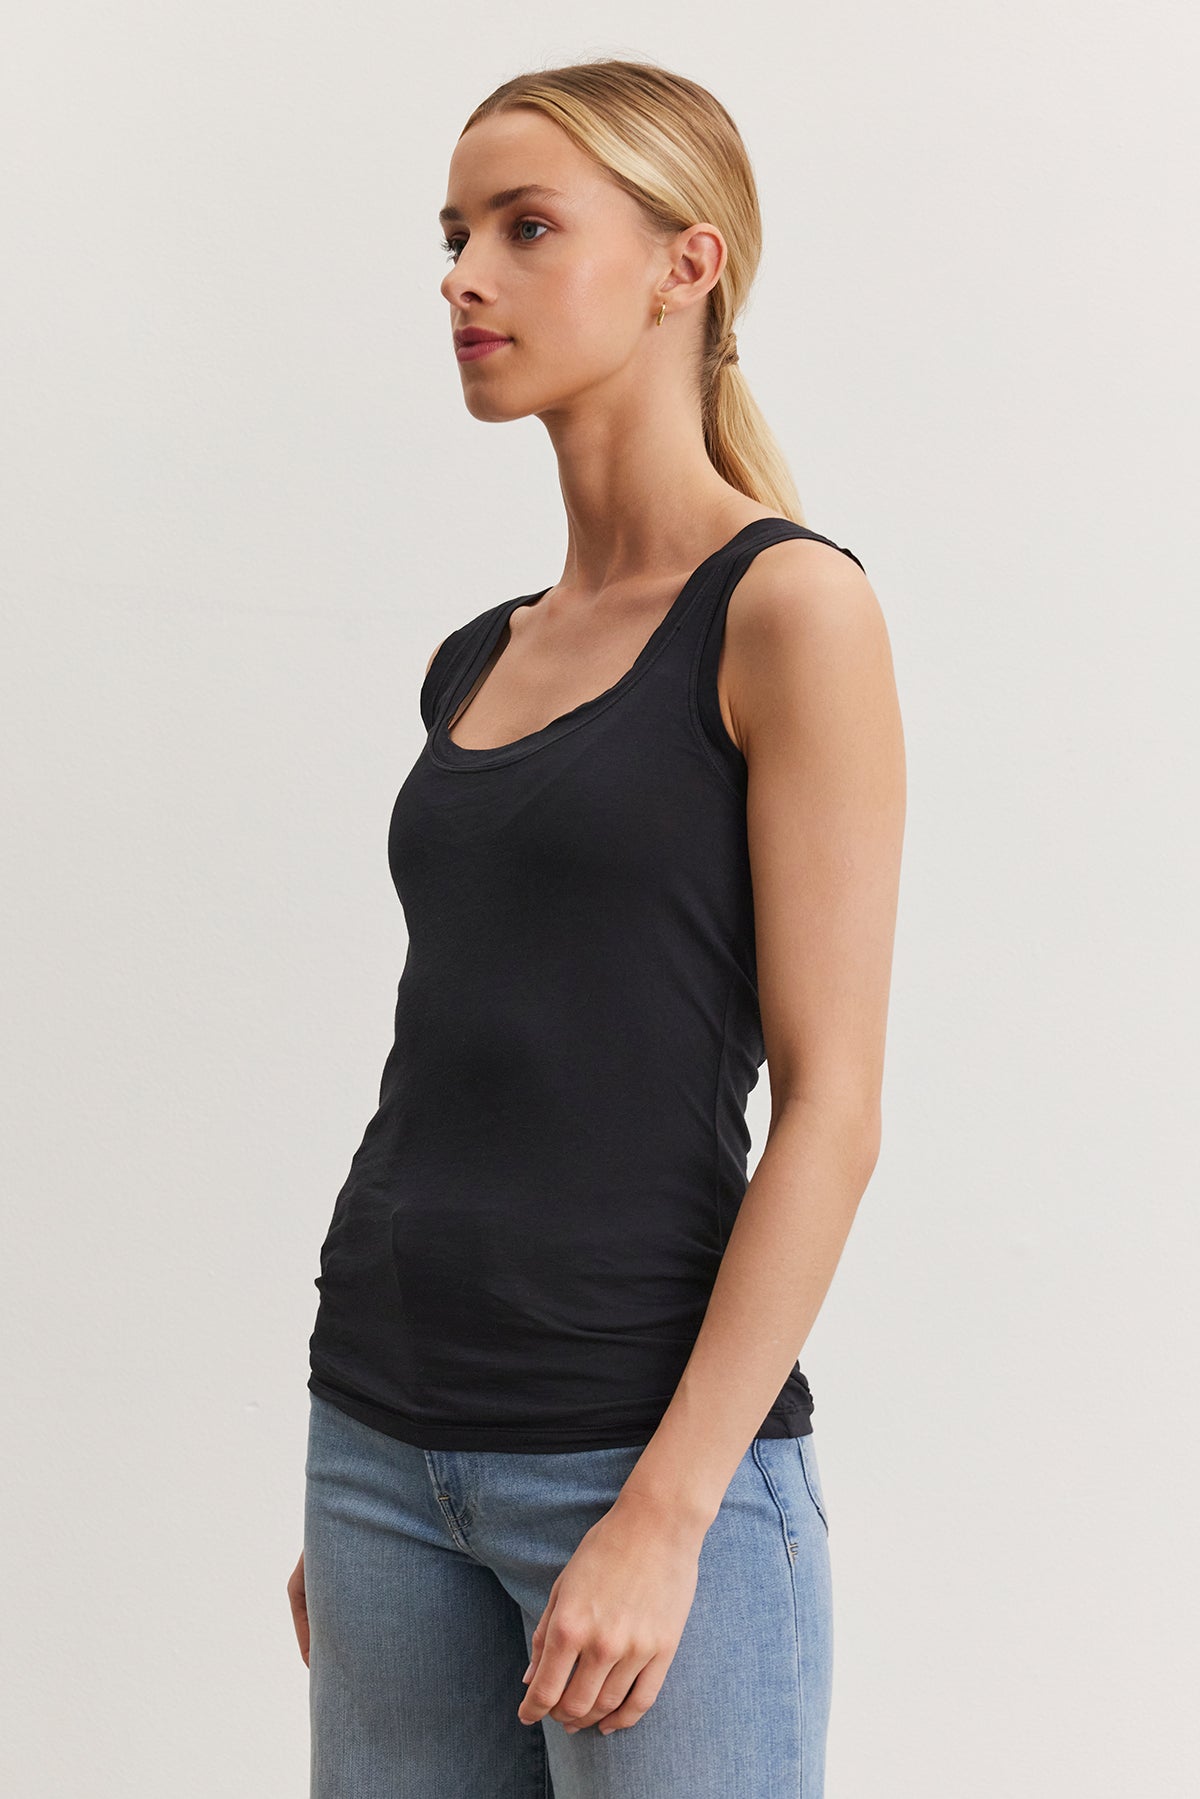 A person with light brown hair in a ponytail is wearing a black MOSSY TANK TOP by Velvet by Graham & Spencer and blue jeans, standing against a plain white background and looking to the side.-36984053006529